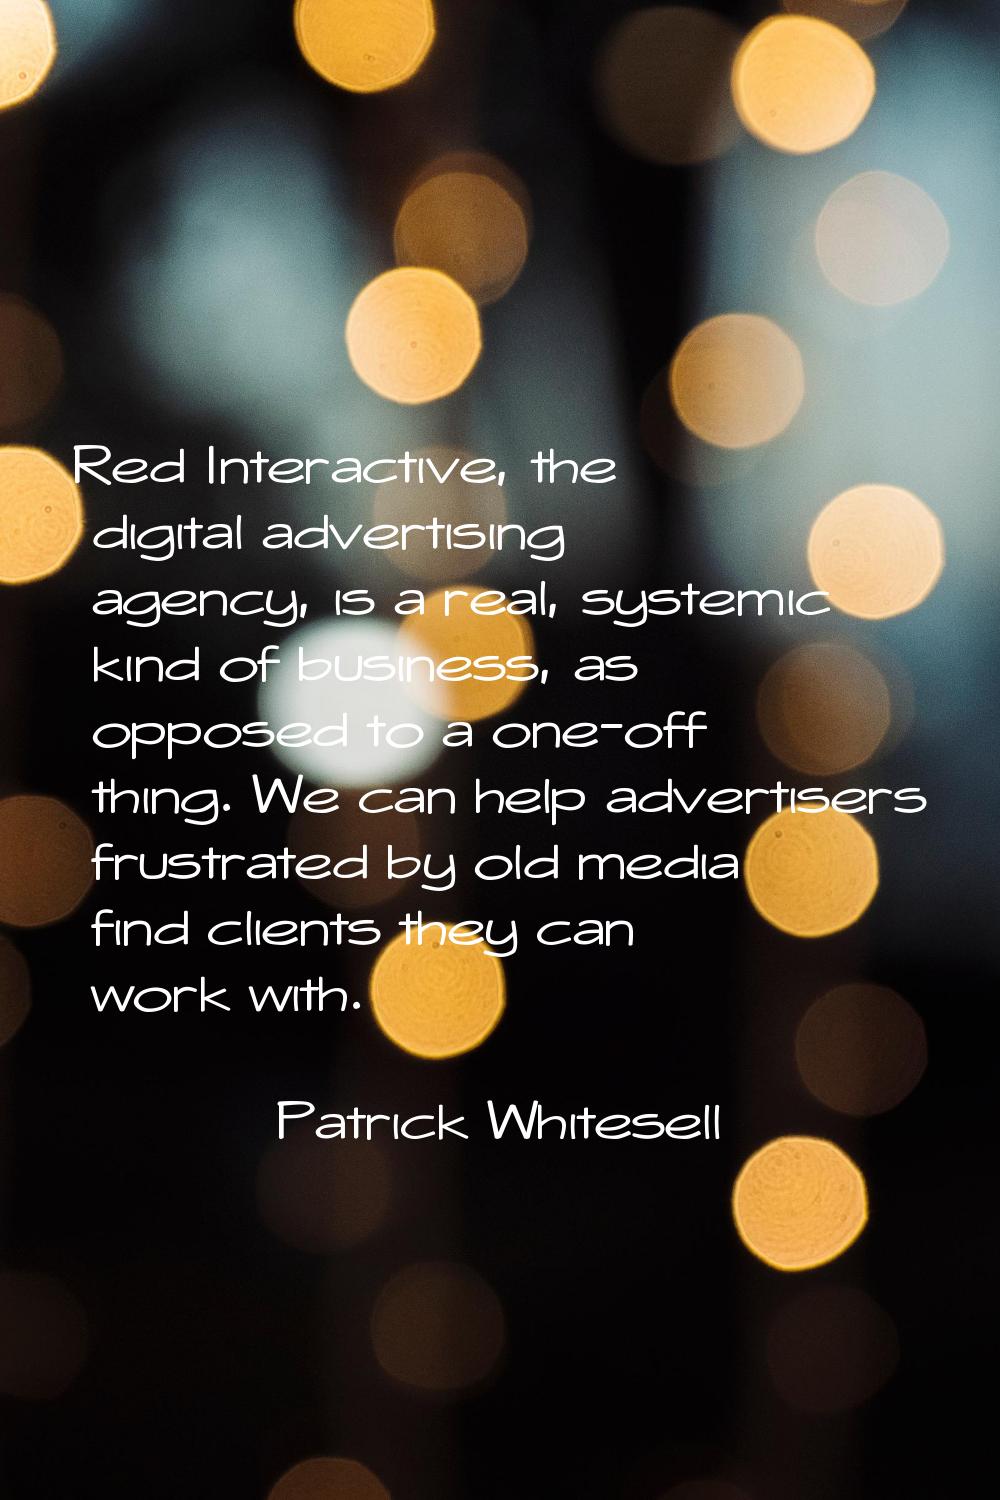 Red Interactive, the digital advertising agency, is a real, systemic kind of business, as opposed t